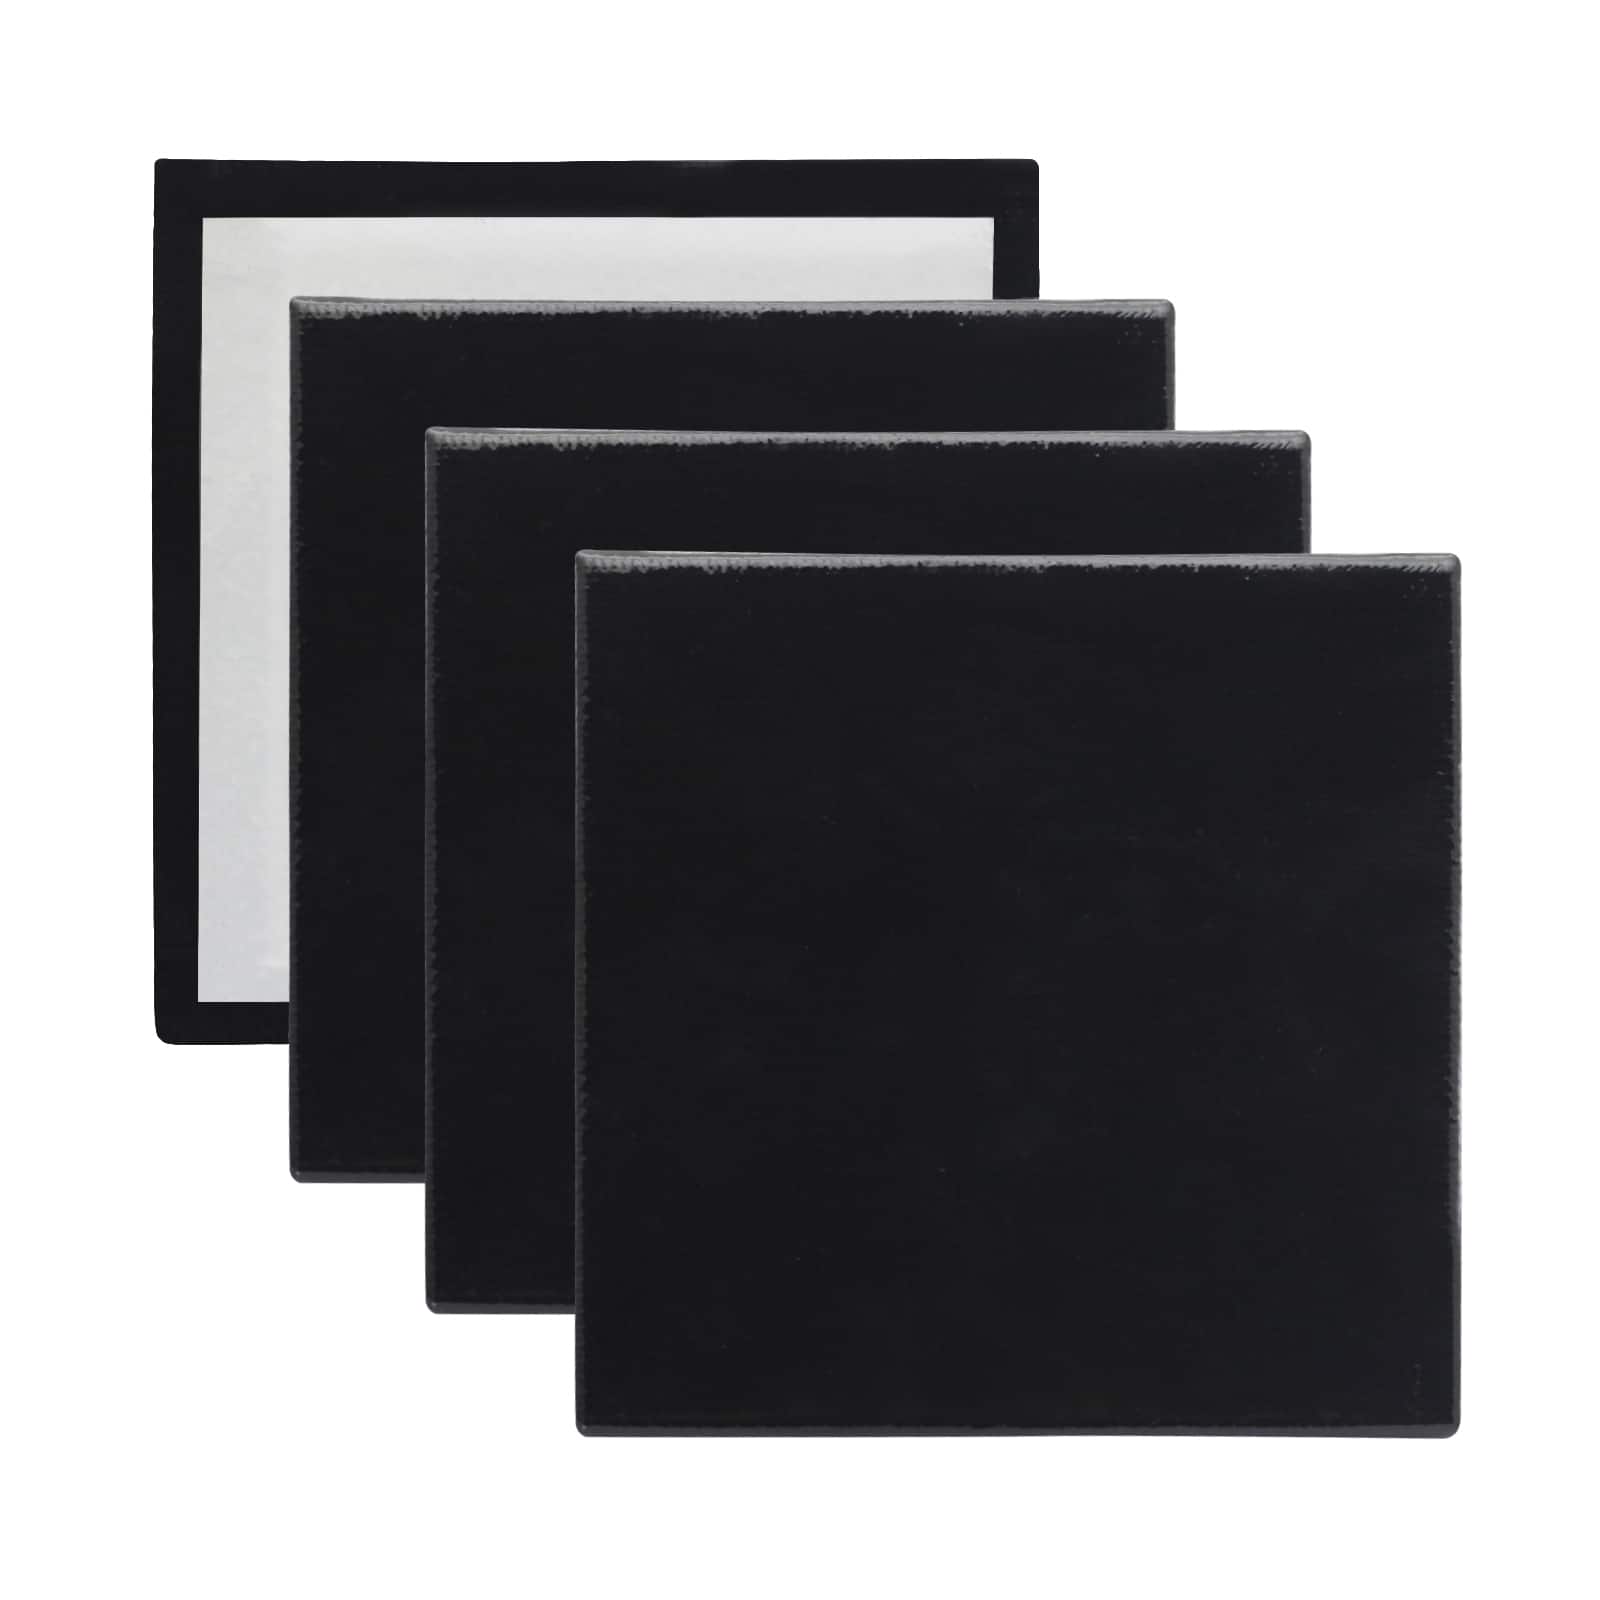 SL crafts Mini Stretched Canvas 4X4 ( 6 Mini Canvases) by SL crafts